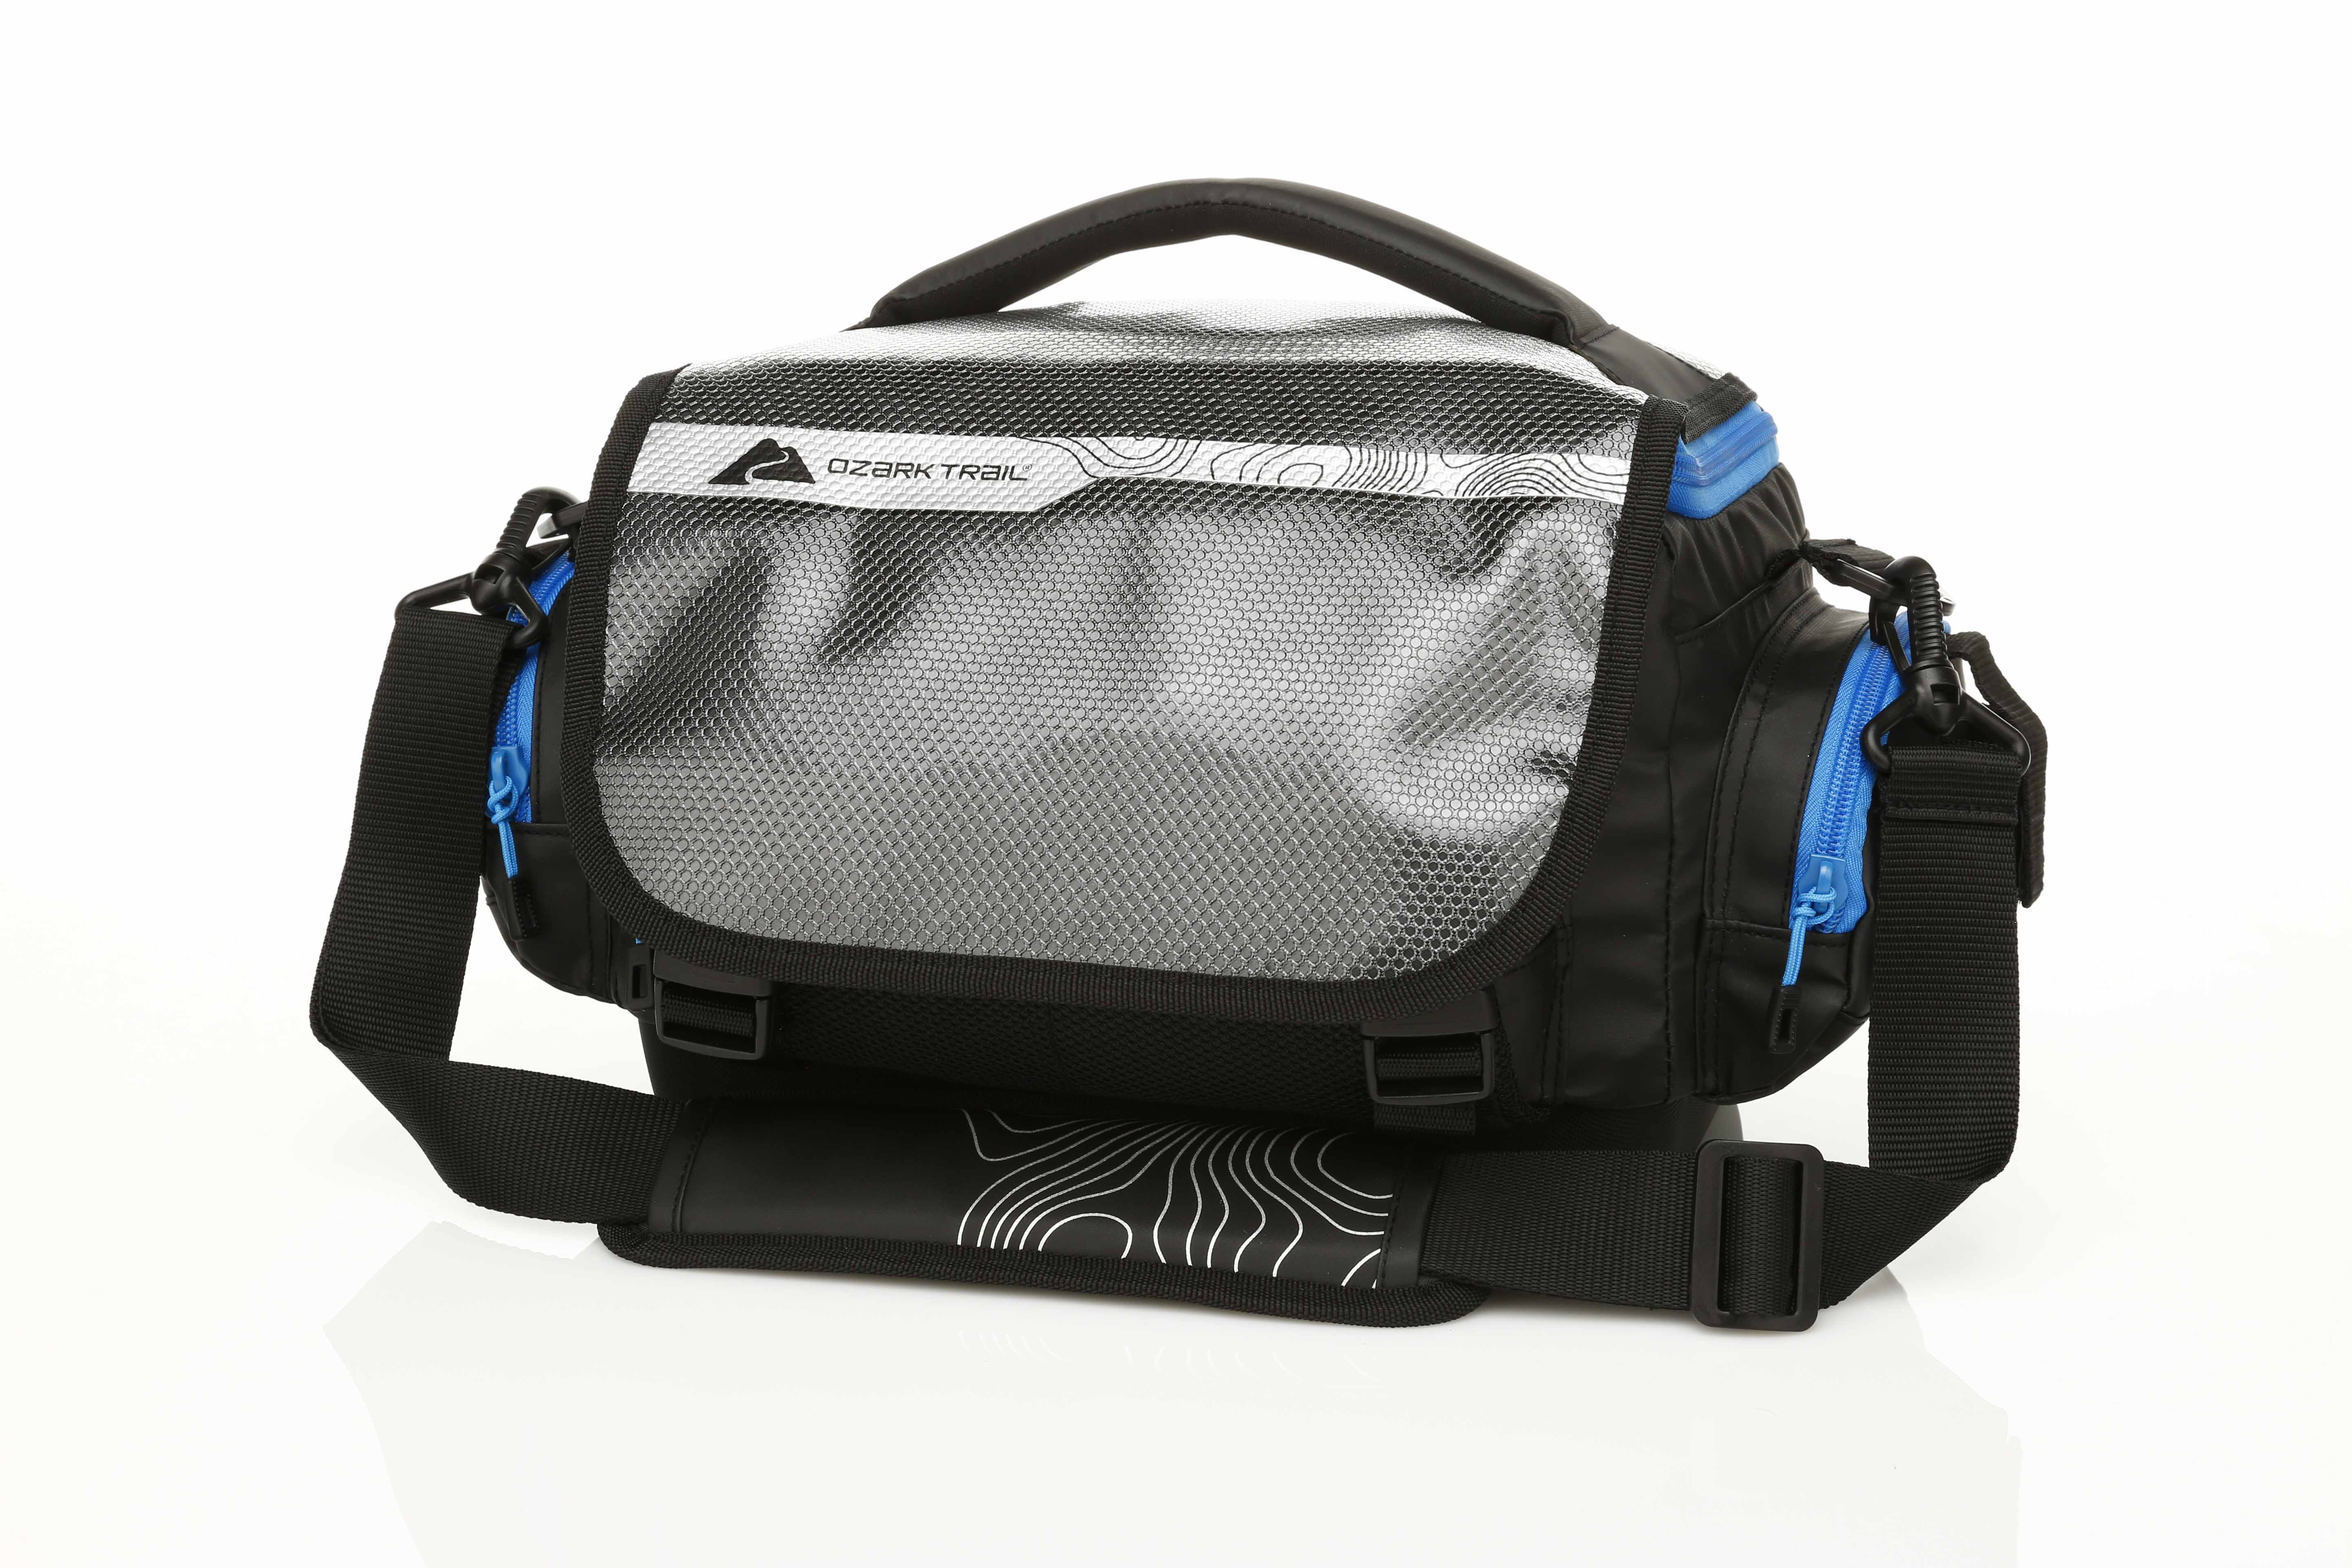 Must Have Tackle Box Under $20 - Ozark Trail 360 Tackle Bag Review